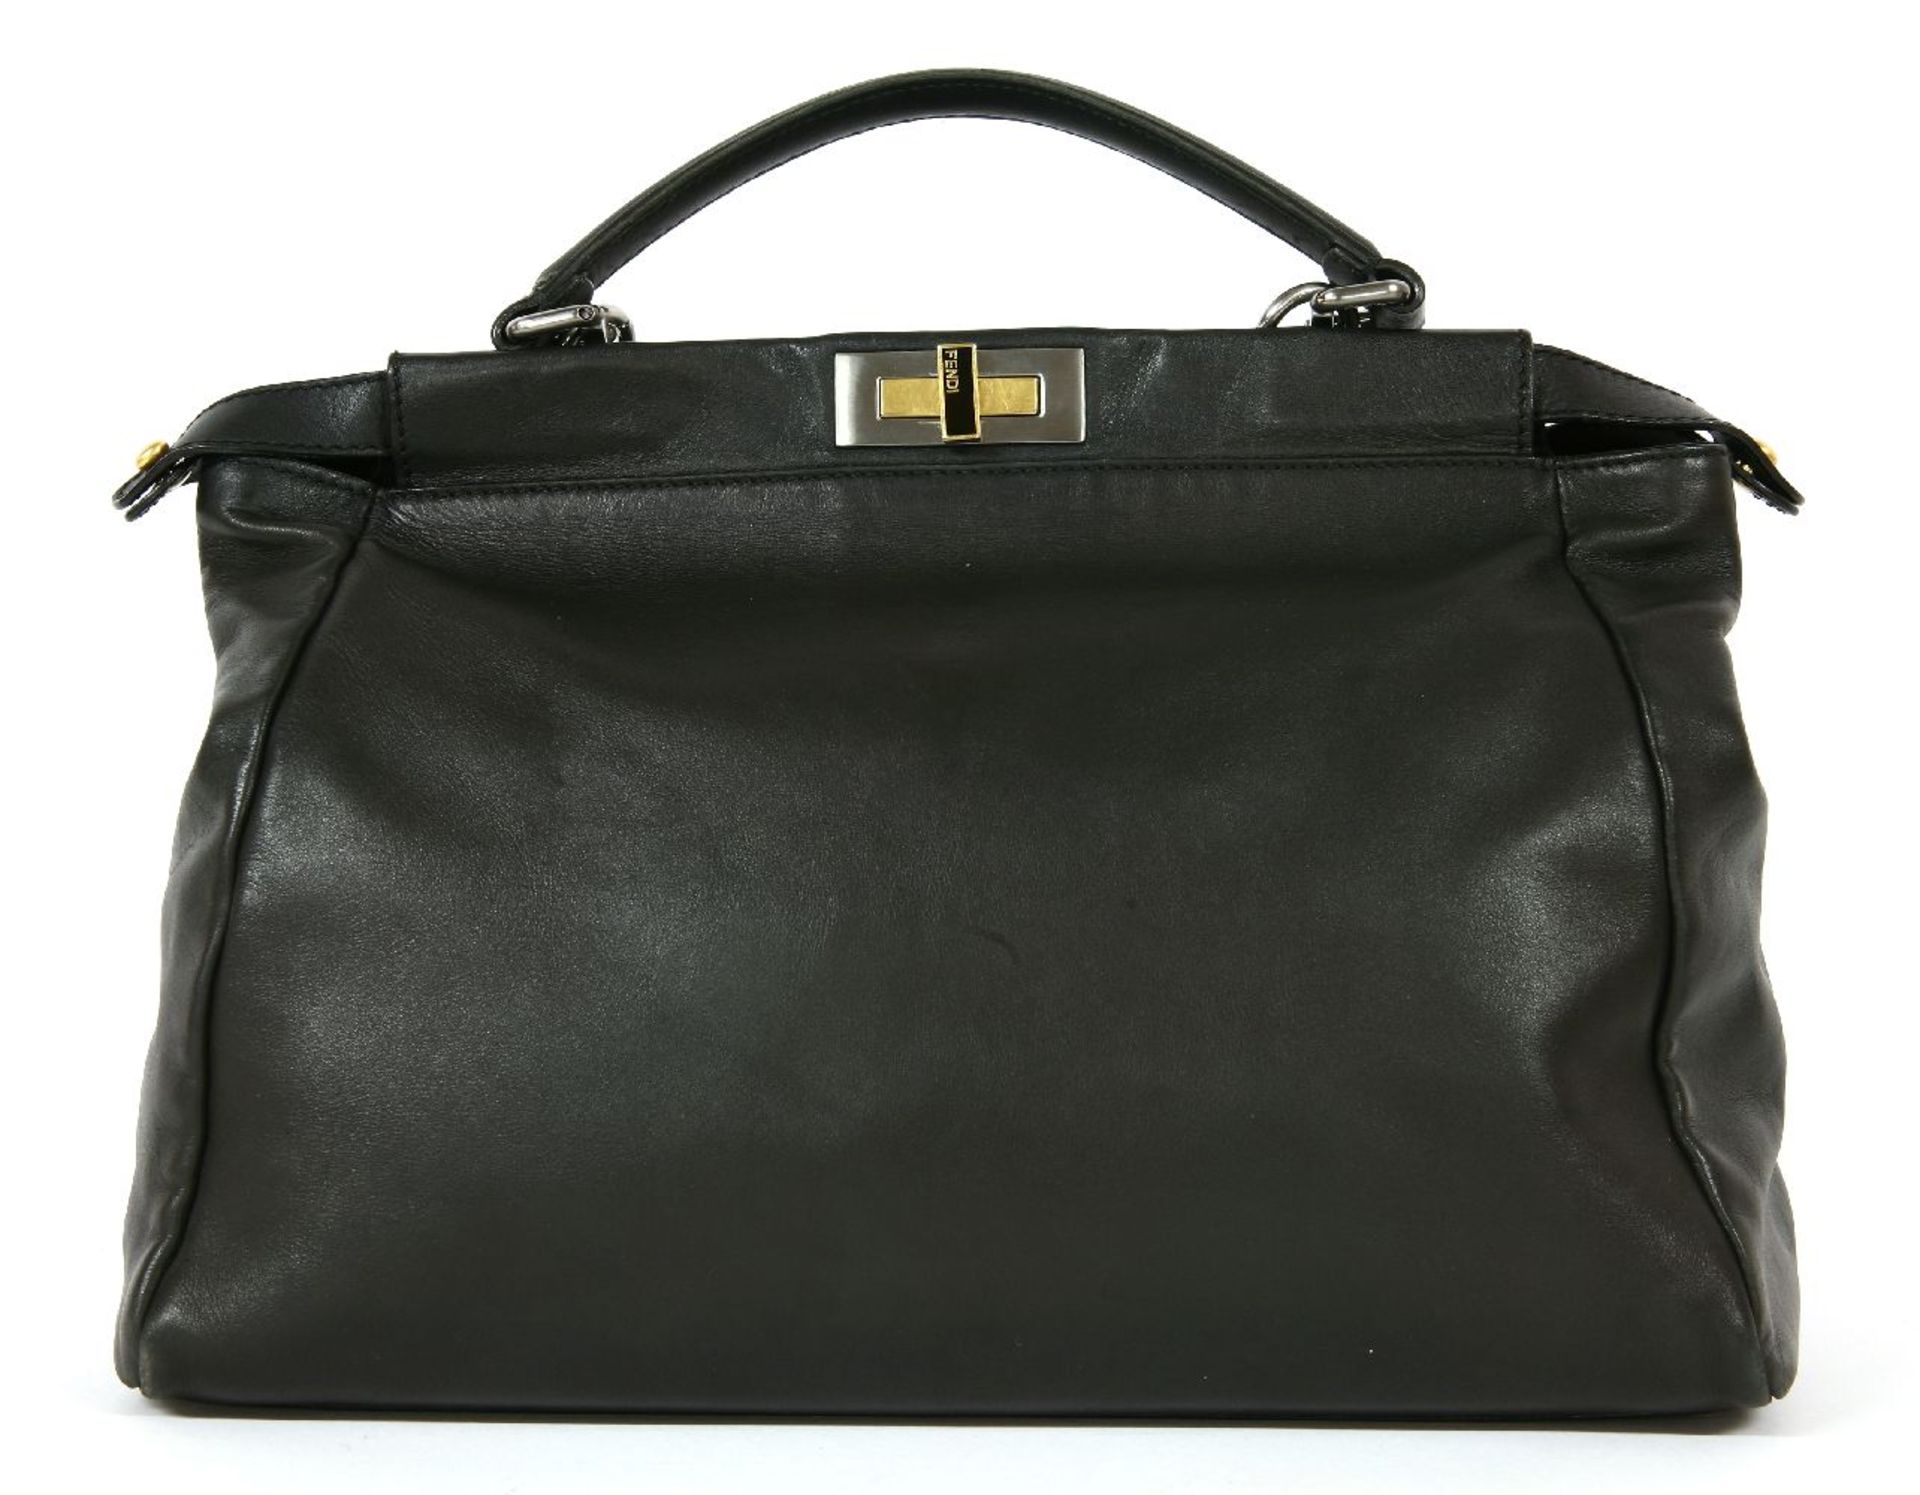 A Fendi 'Peekaboo' large model handbag,crafted in soft leather, brushed metal and gold-tone